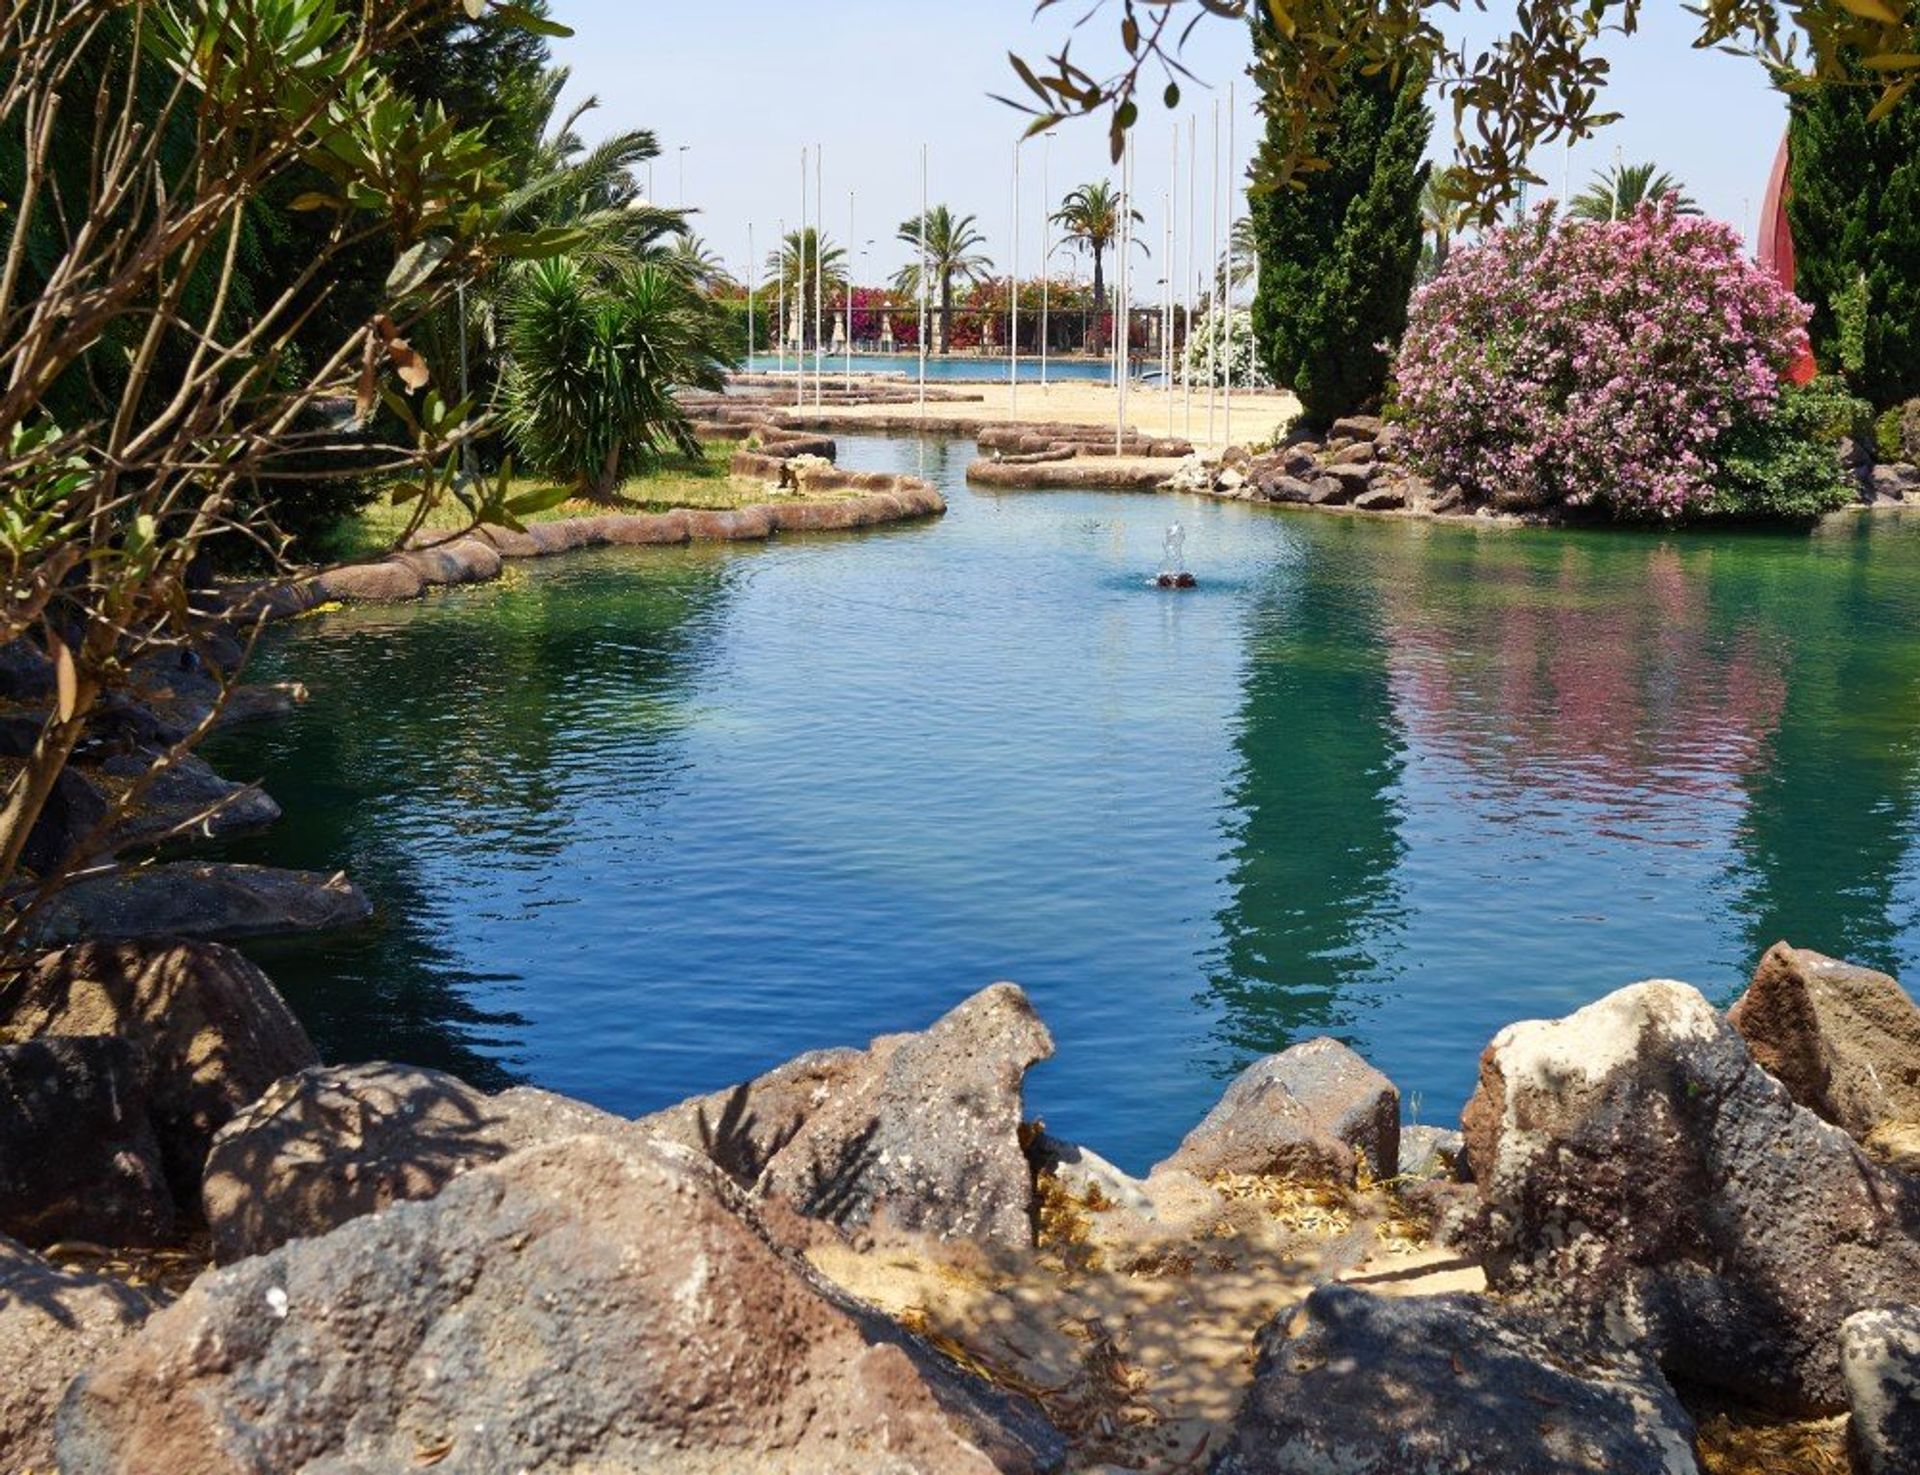 Kids will love Park of Nations with its beautiful lake, wildlife enclosure and playground